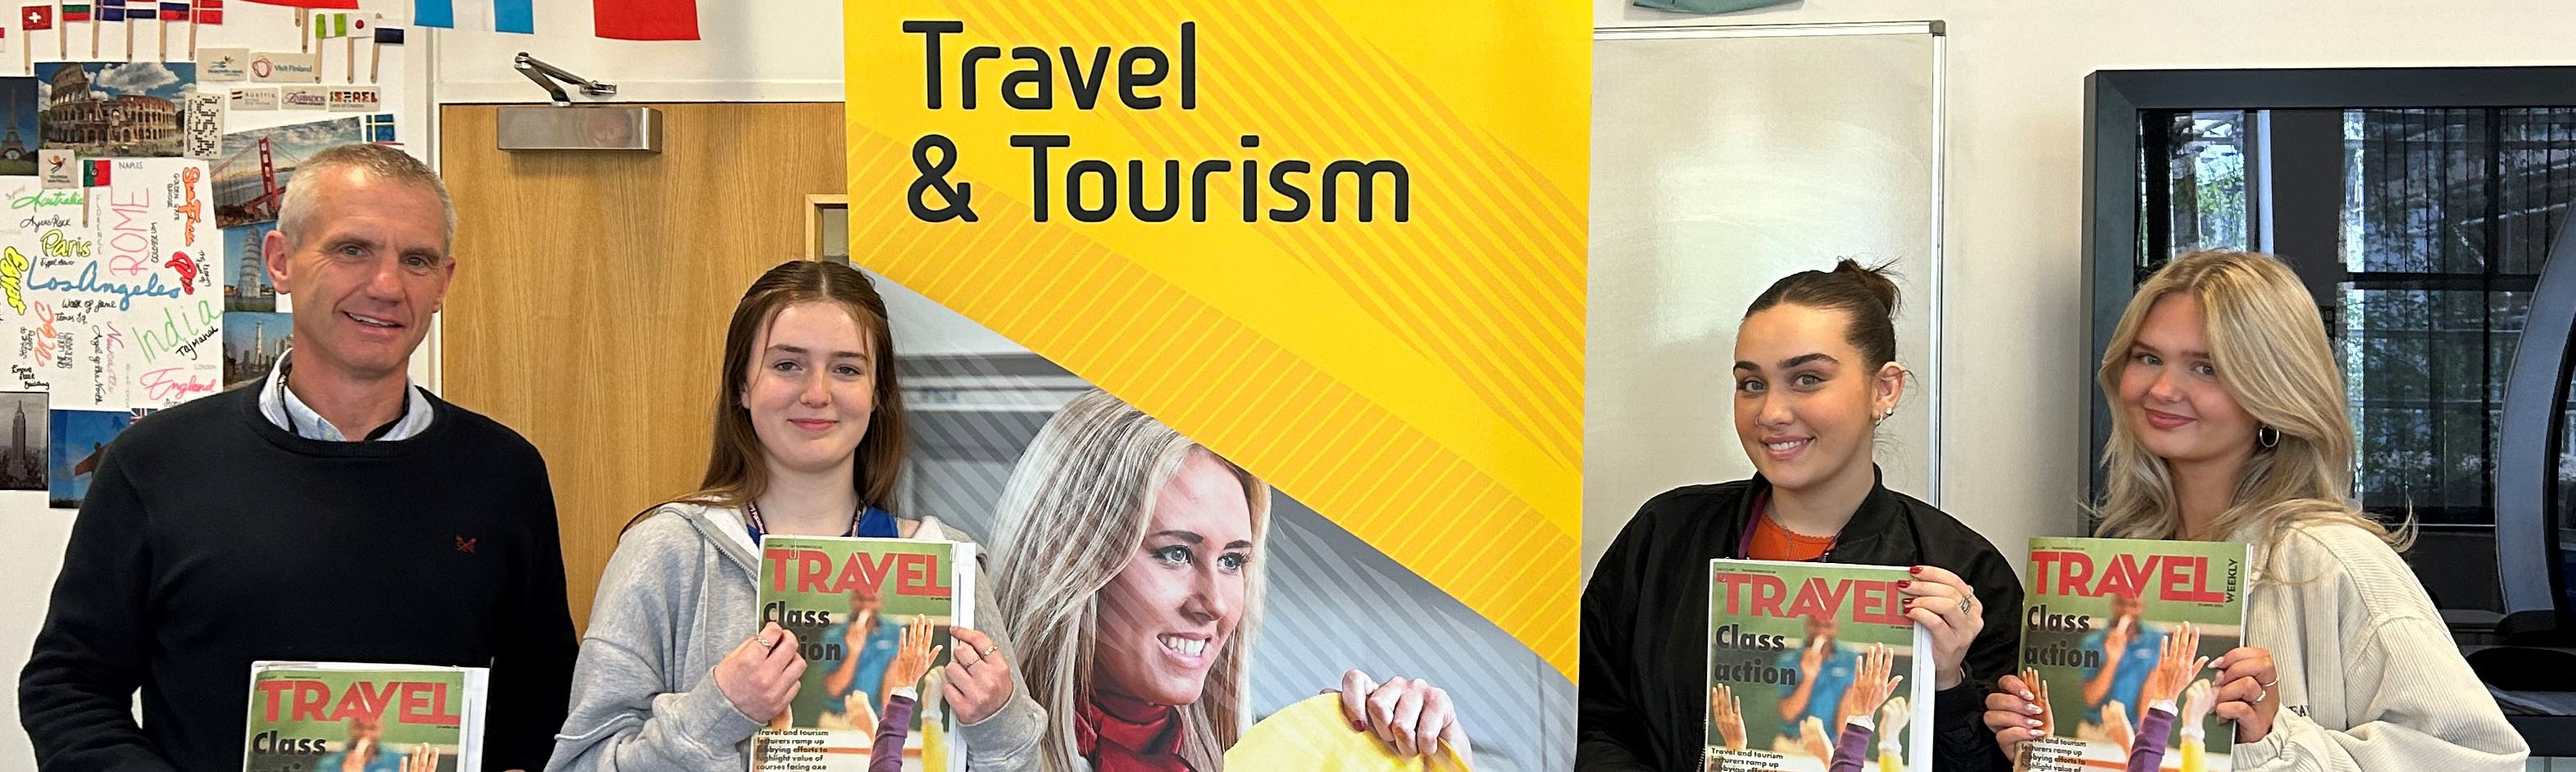 BMet Tutor Fights Cause for Travel and Tourism FE Pathways, following Education Reforms